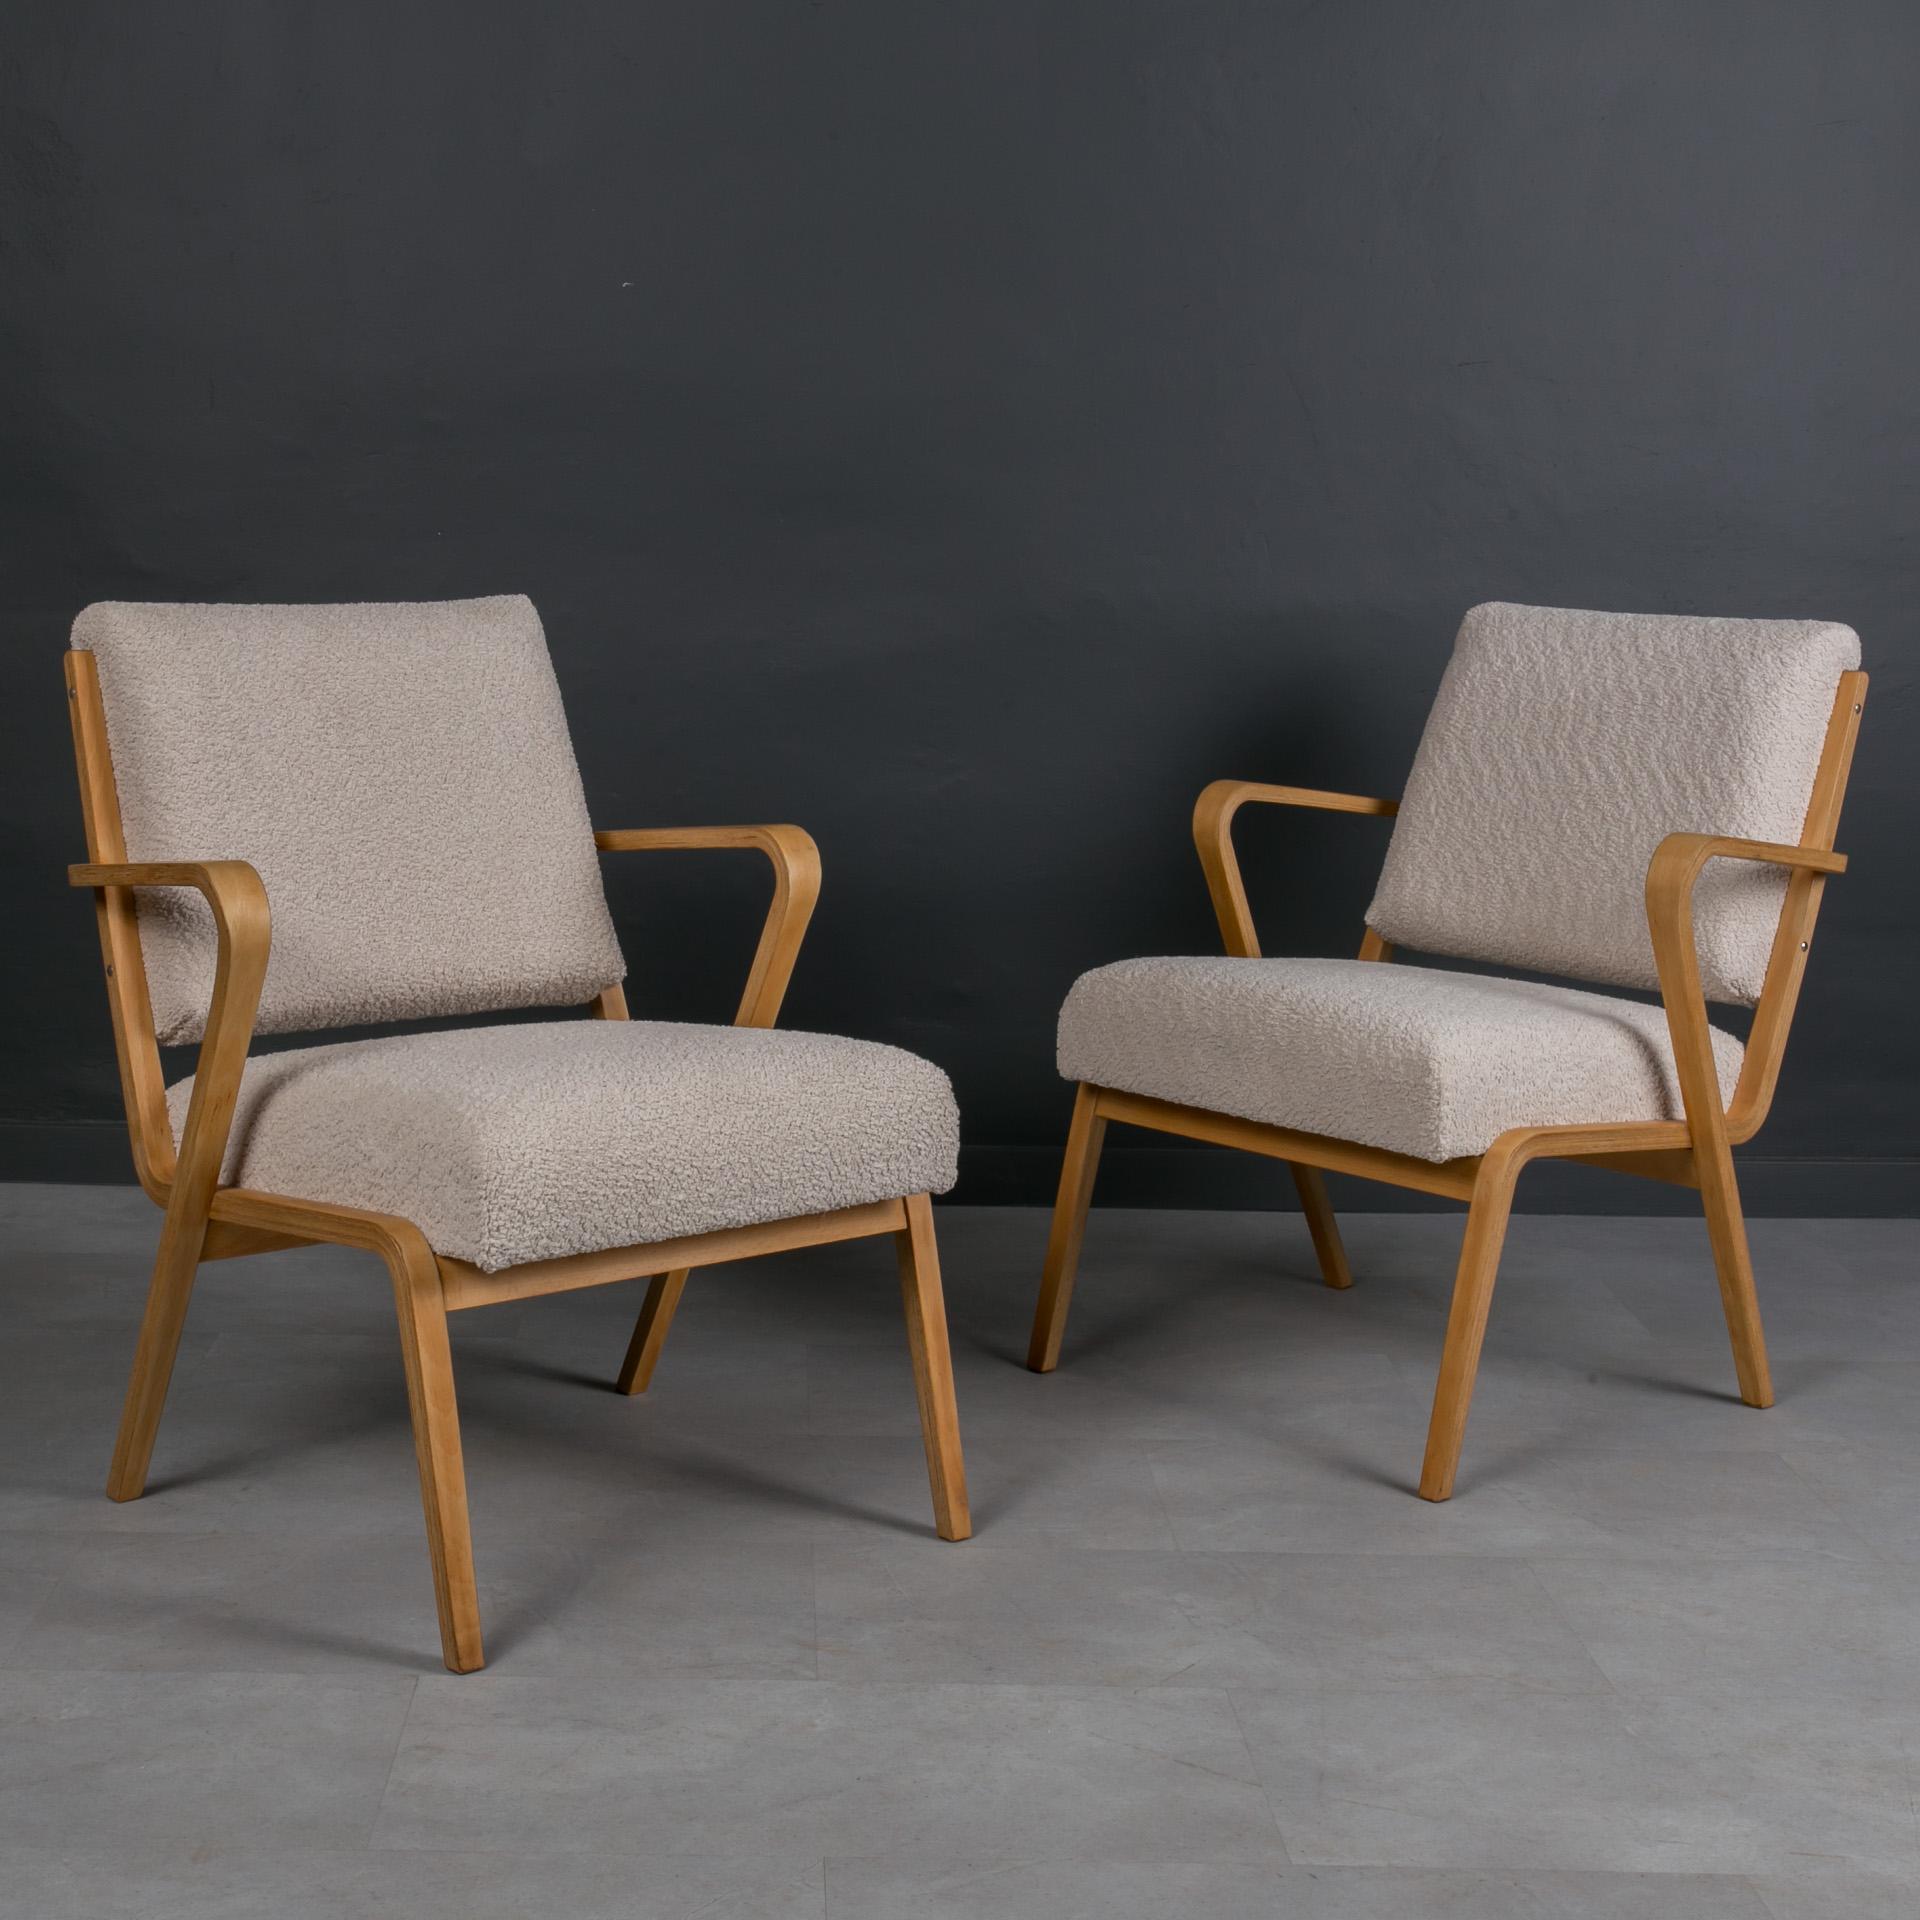 Mid-Century Modern Set of Two Lounge Chairs by S. Selmanagić, 1960s, Reupholstered in Creamy Boucle For Sale